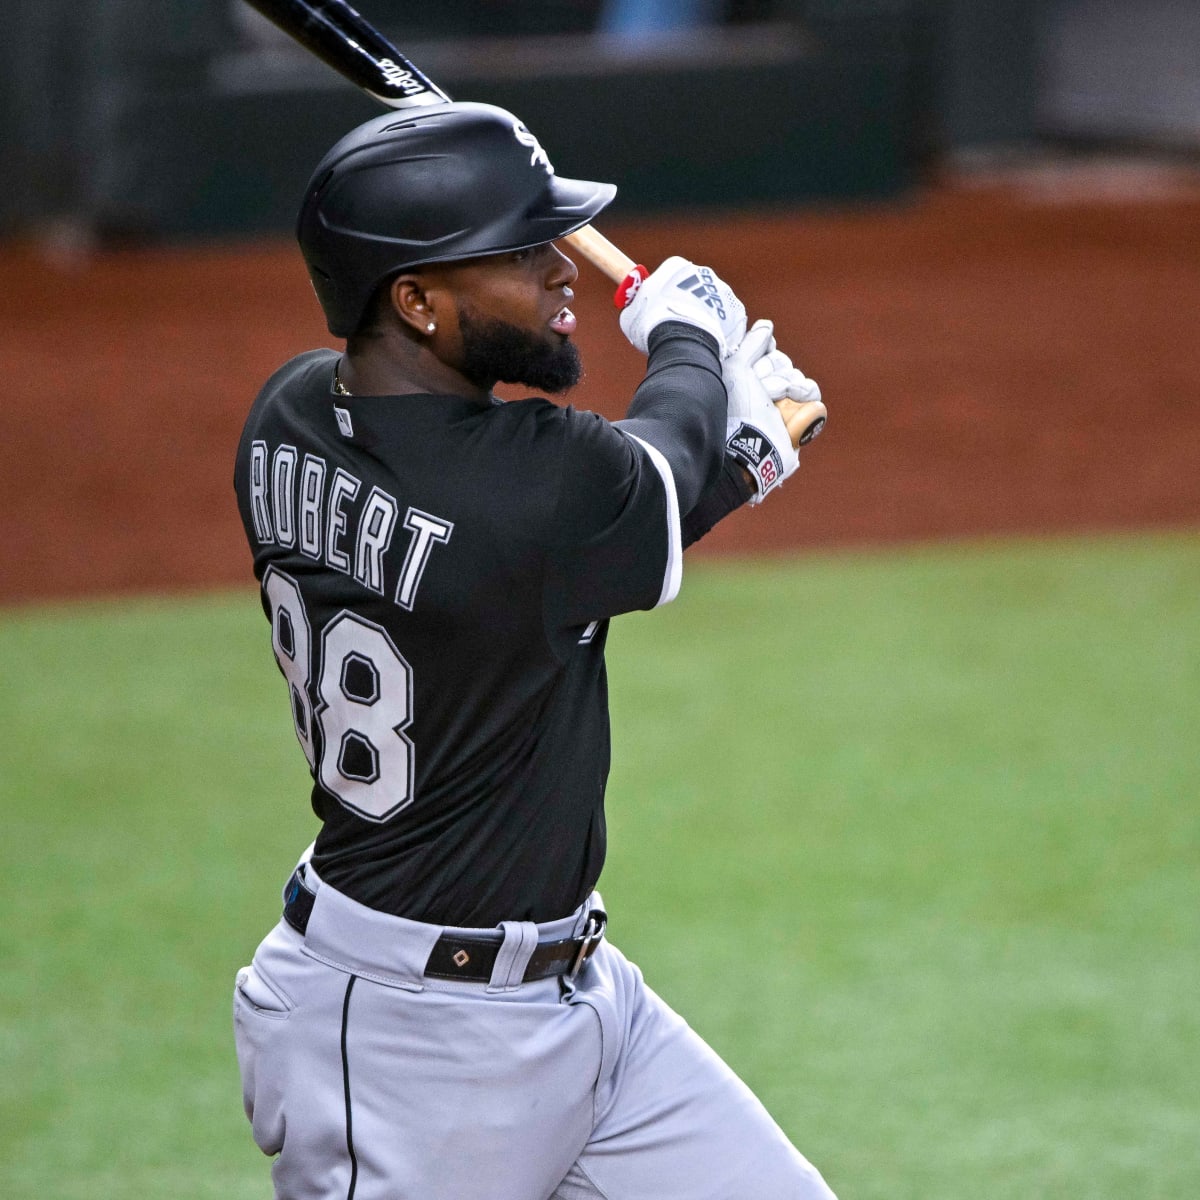 White Sox to activate Robert after missing over 3 months with